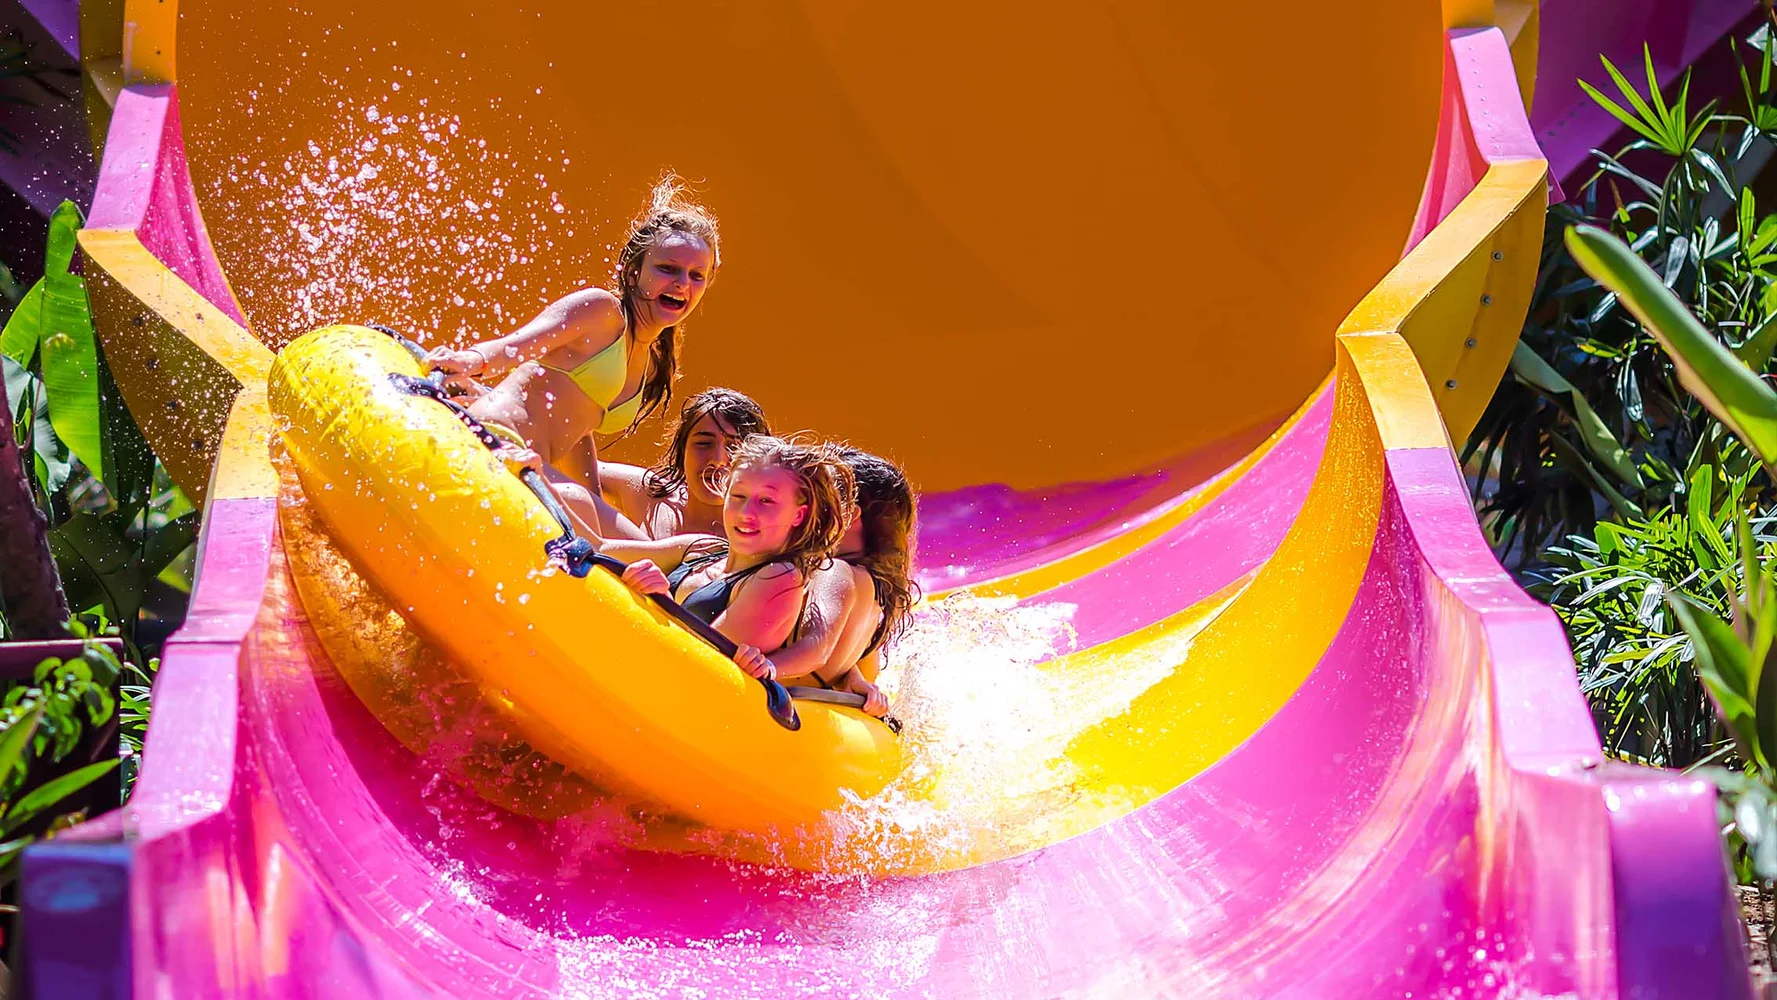 Waterbom Bali Tickets – Asia's #1 Water Park